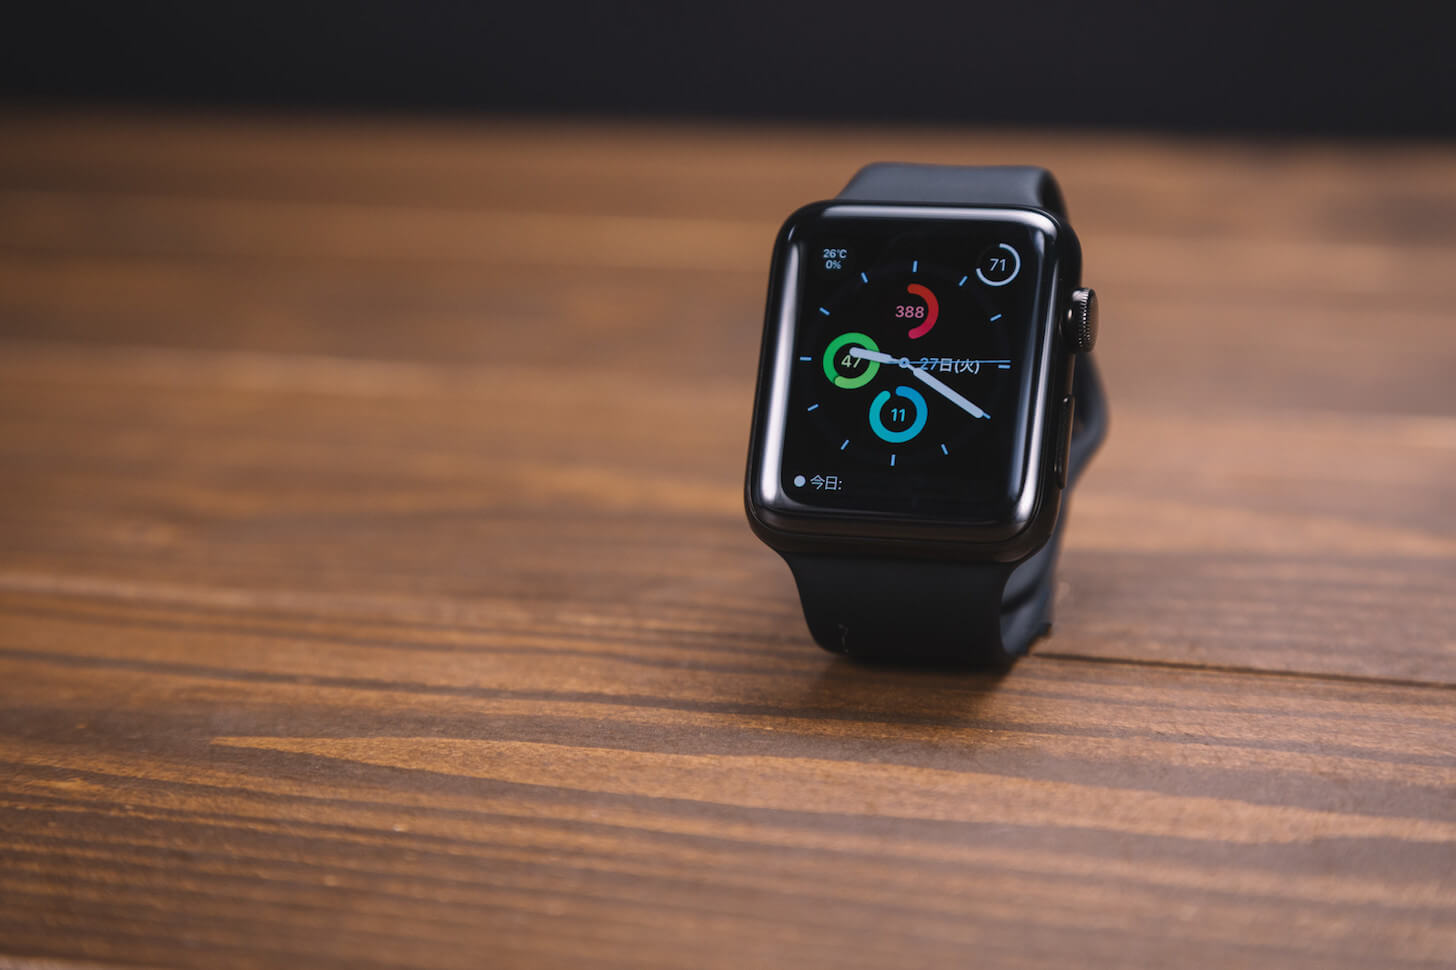 Have an interest in Apple Watch Series 3 3